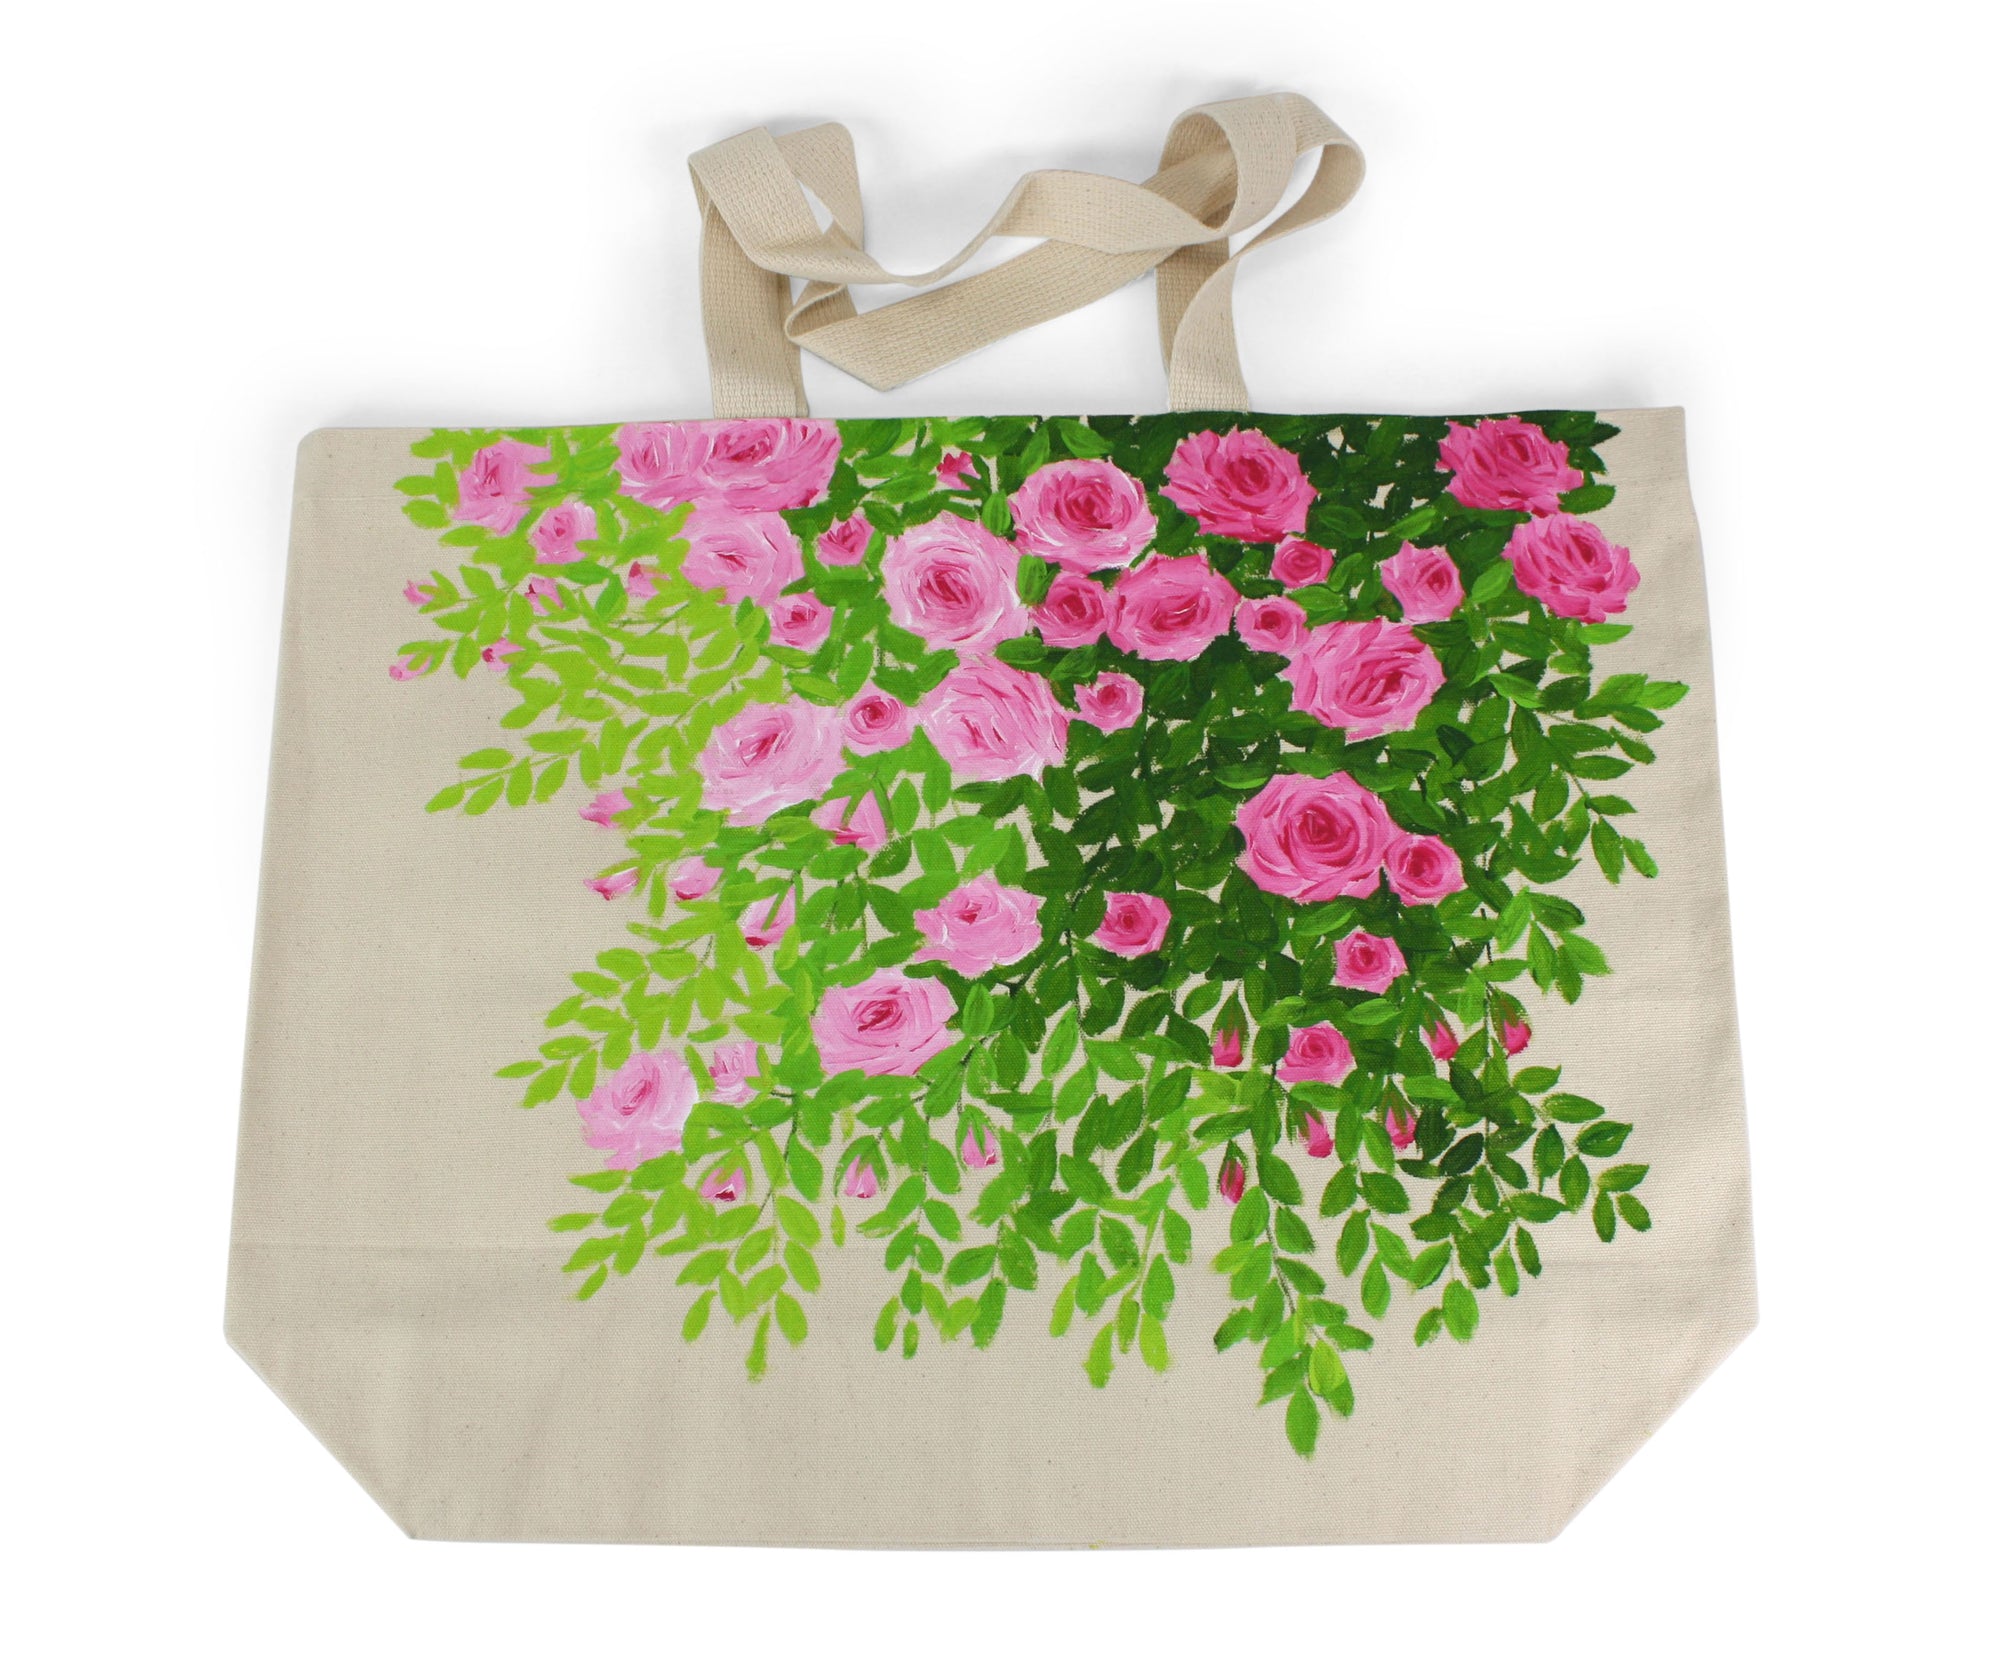 55cm Handmade canvas shopping bag, tote bag, extra large size, handpainted in Thailand - farangshop-co